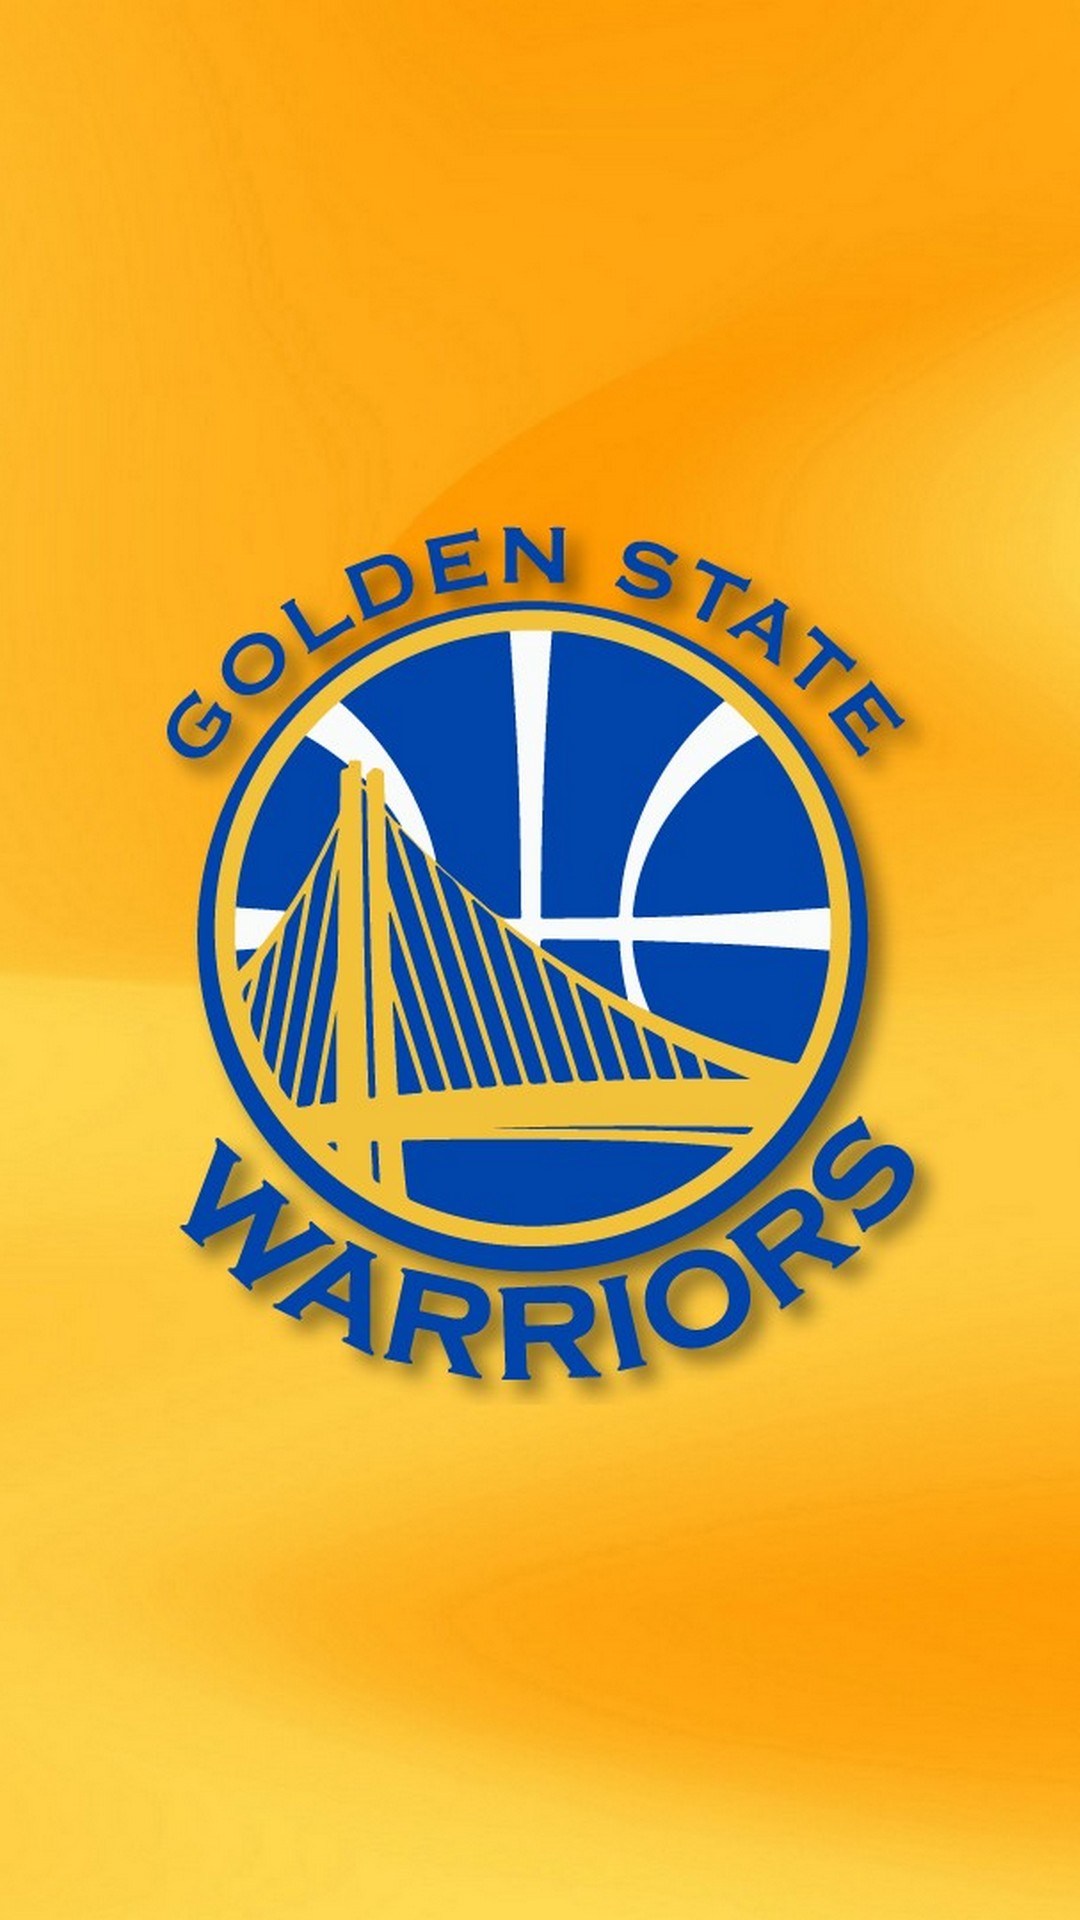 Golden State Warriors Wallpaper For Phone with image resolution 1080x1920 pixel. You can make this wallpaper for your Desktop Computer Backgrounds, Mac Wallpapers, Android Lock screen or iPhone Screensavers